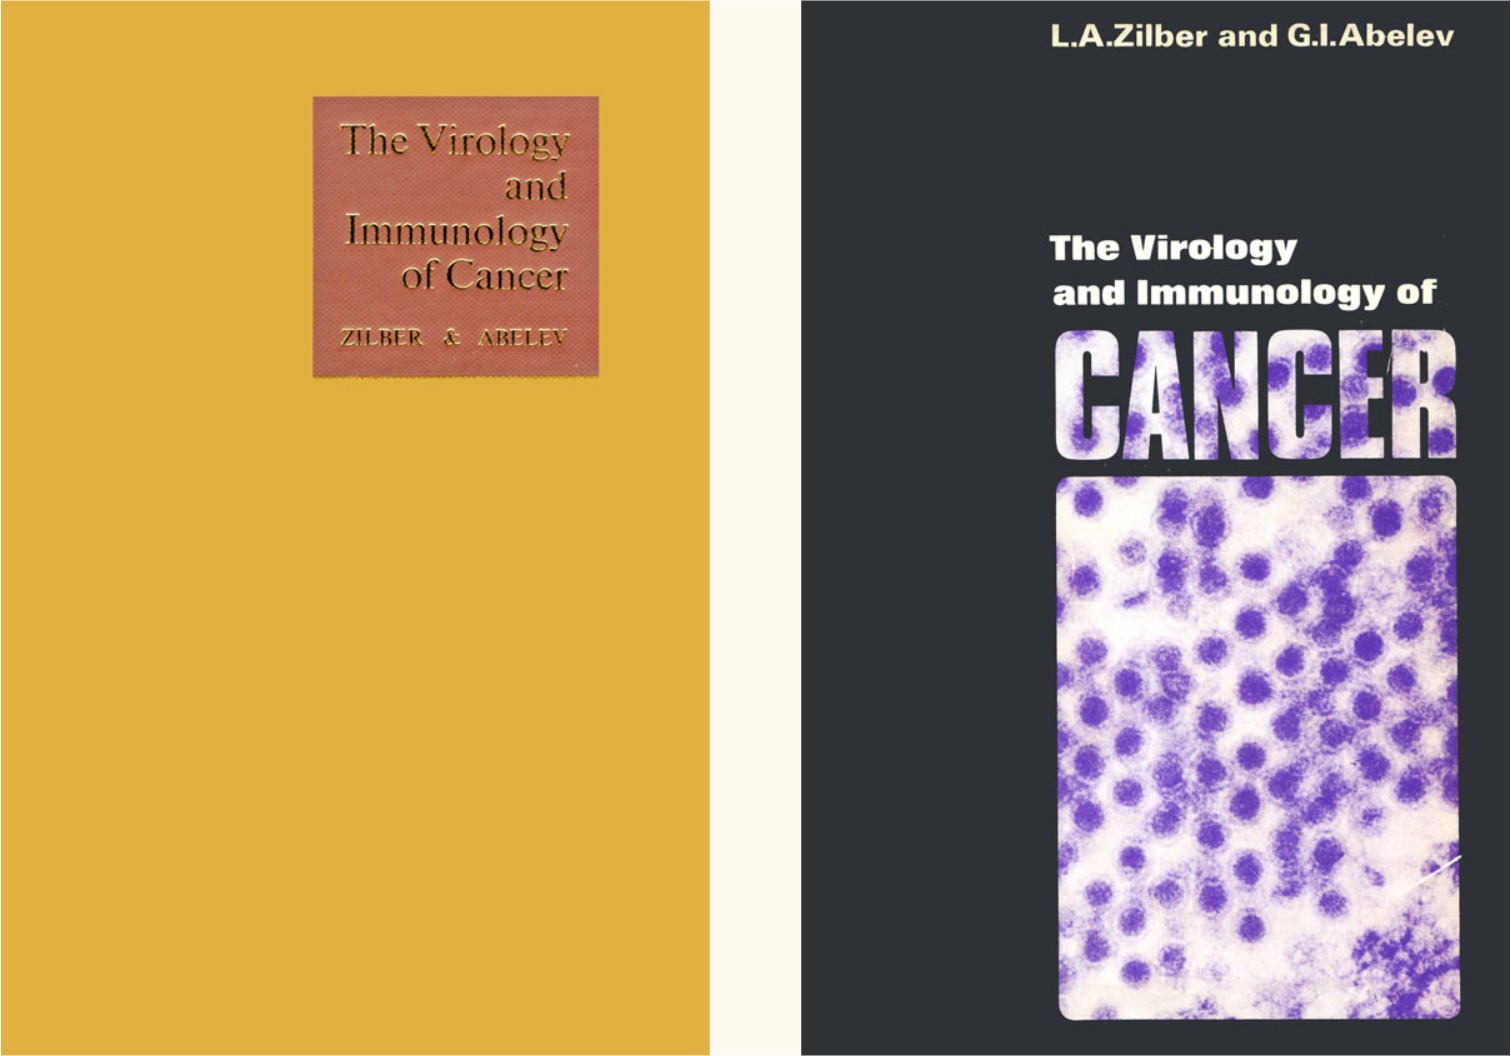 Zilber, Abelev. The Virology and Immunology of Cancer